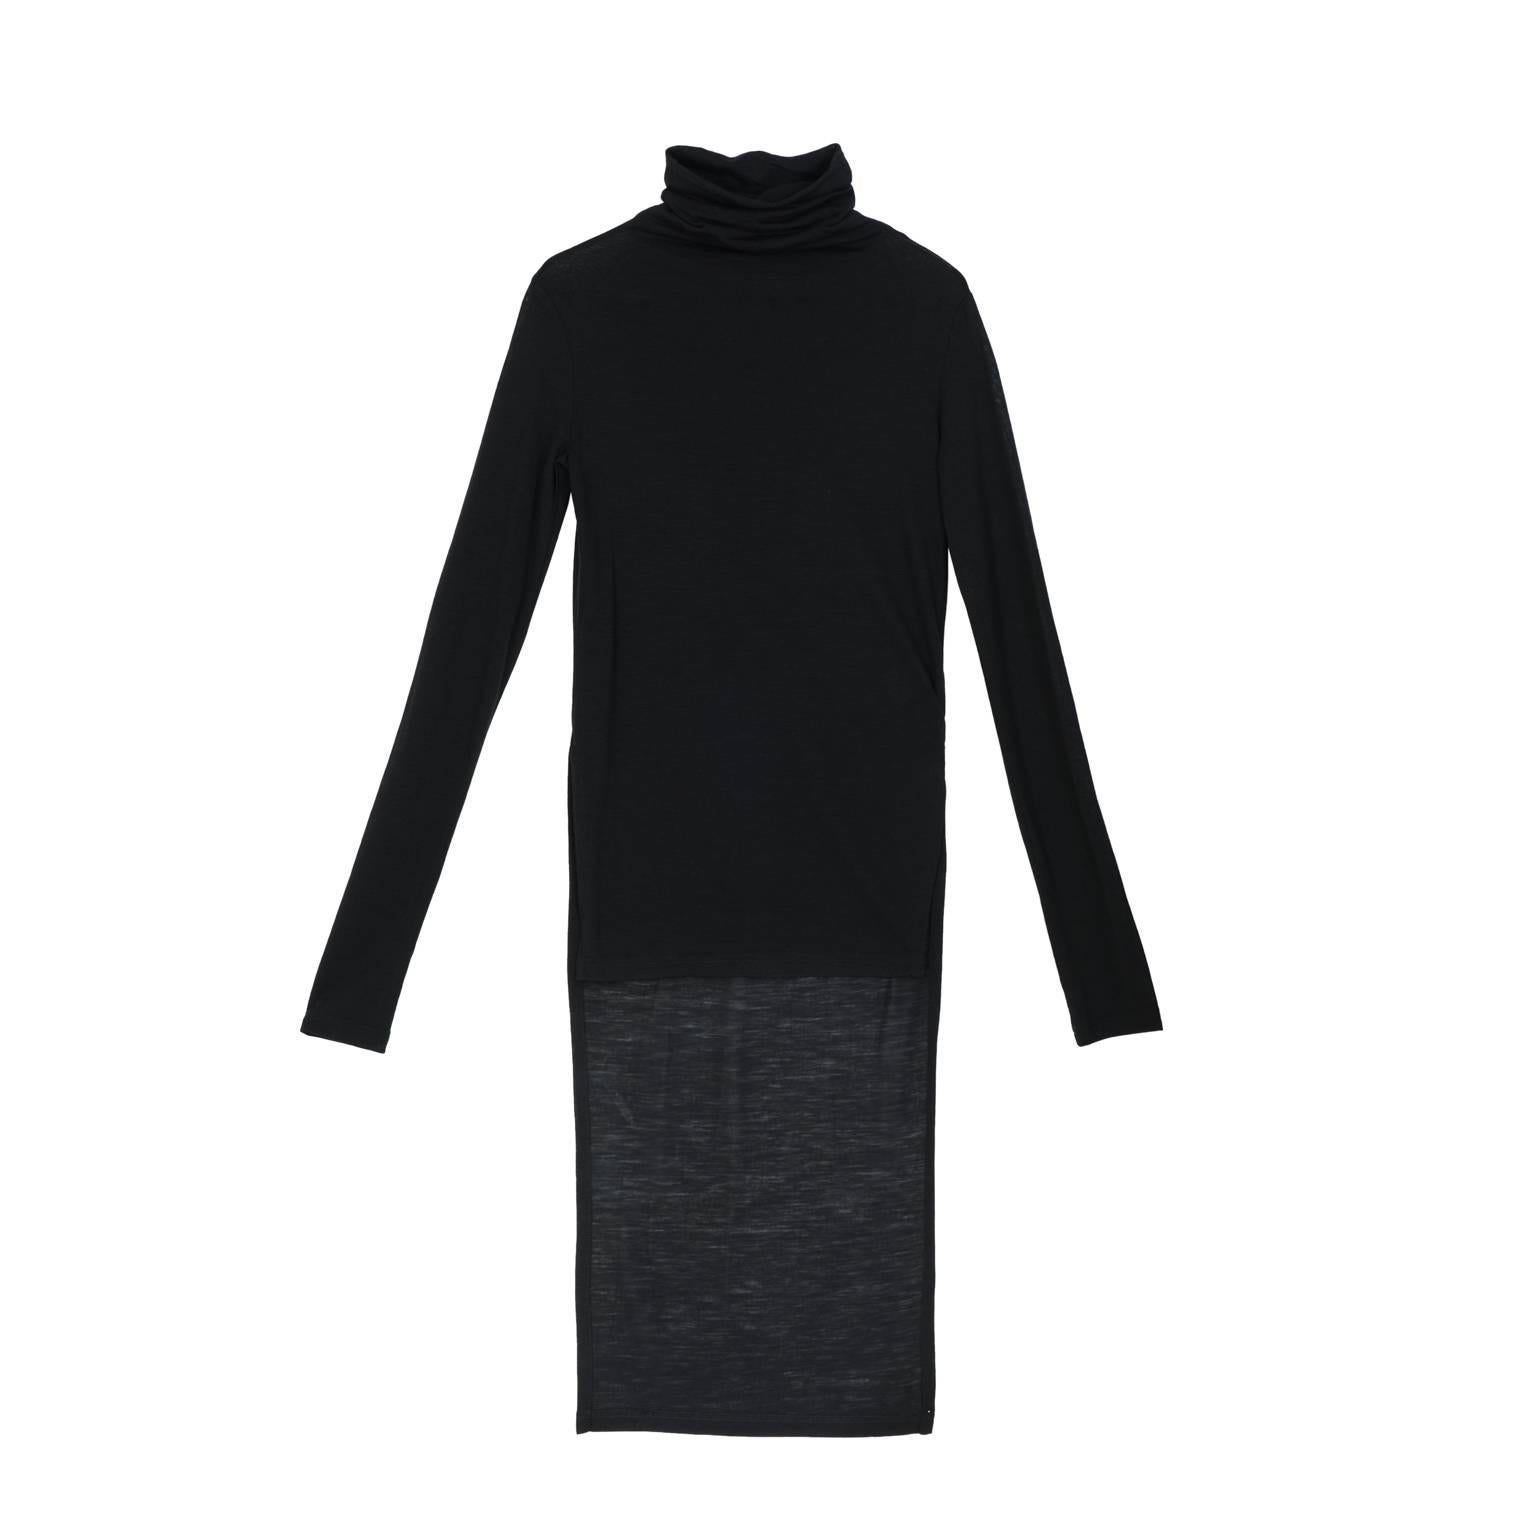 Longsleeve turtleneck pullover in lightweight knit with knee length back panel